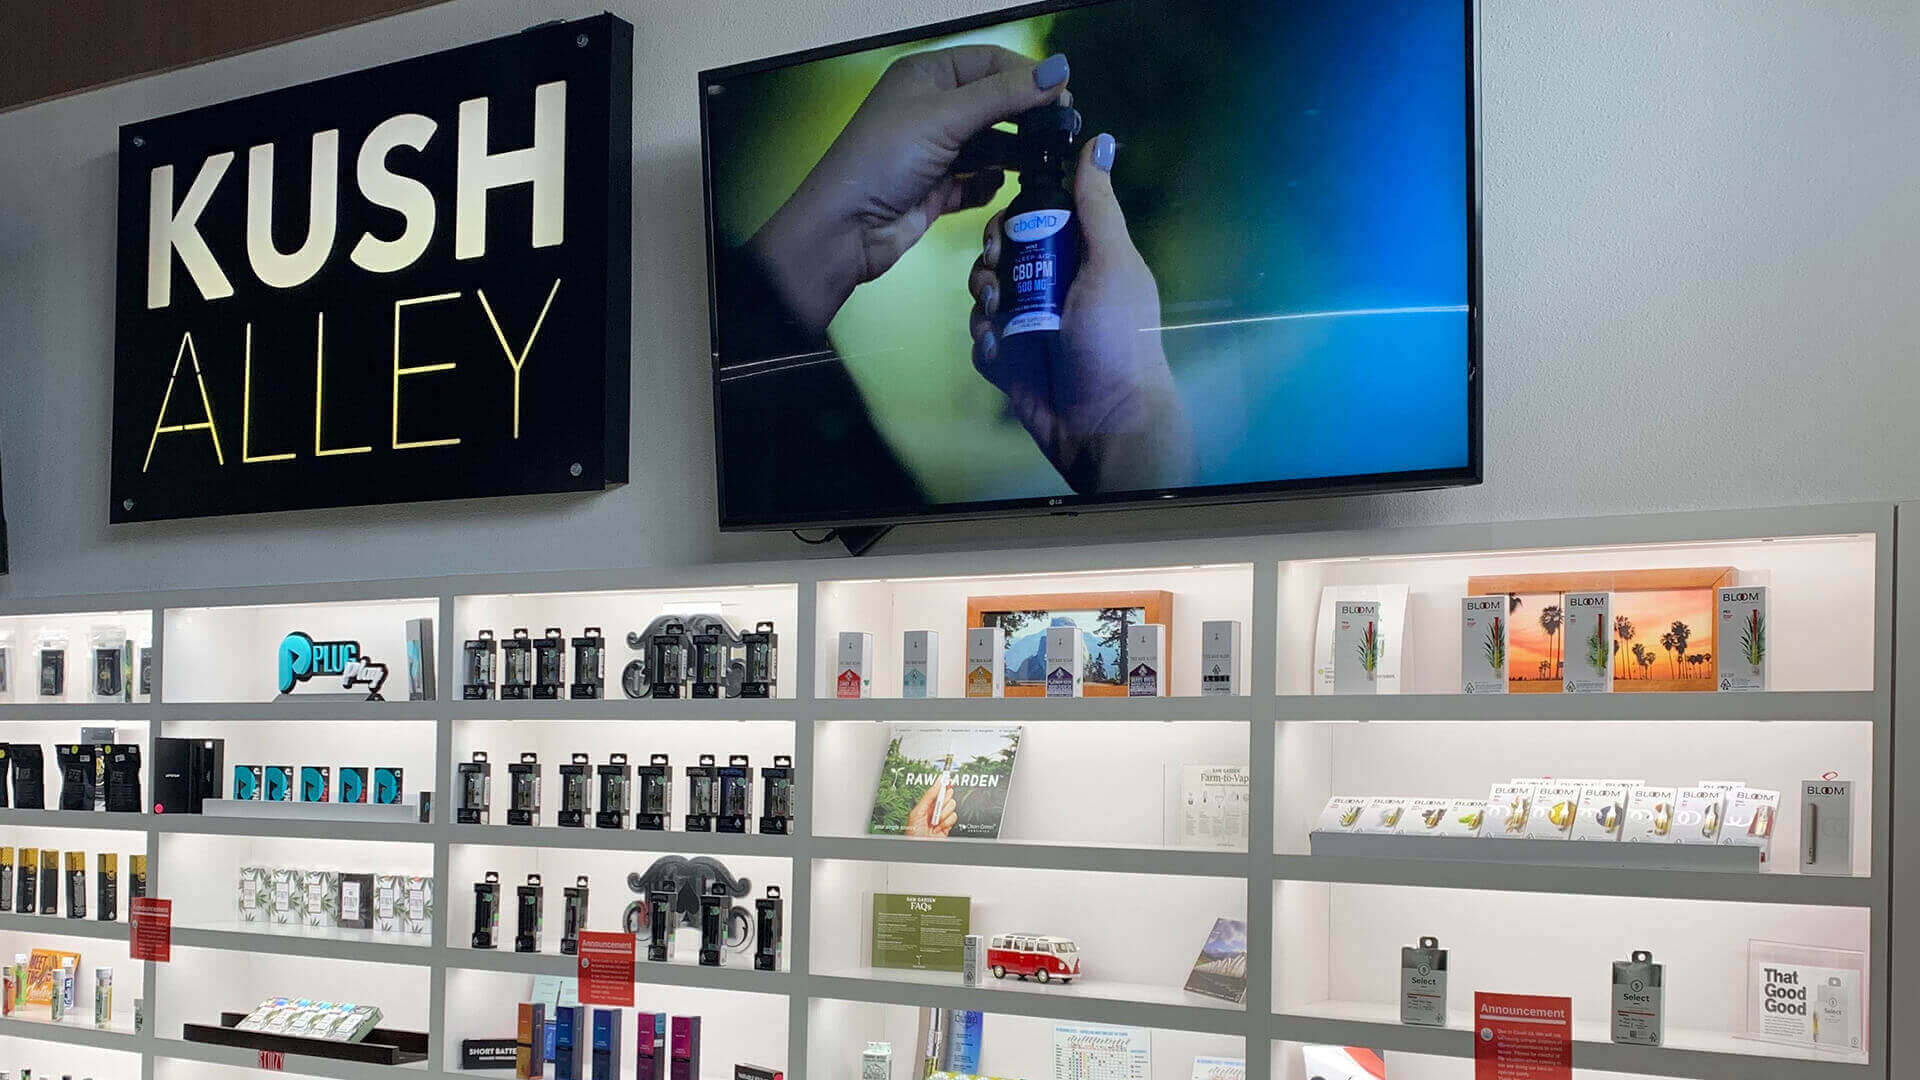 Dispensary point-of-purchase DOOH screen above store shelves